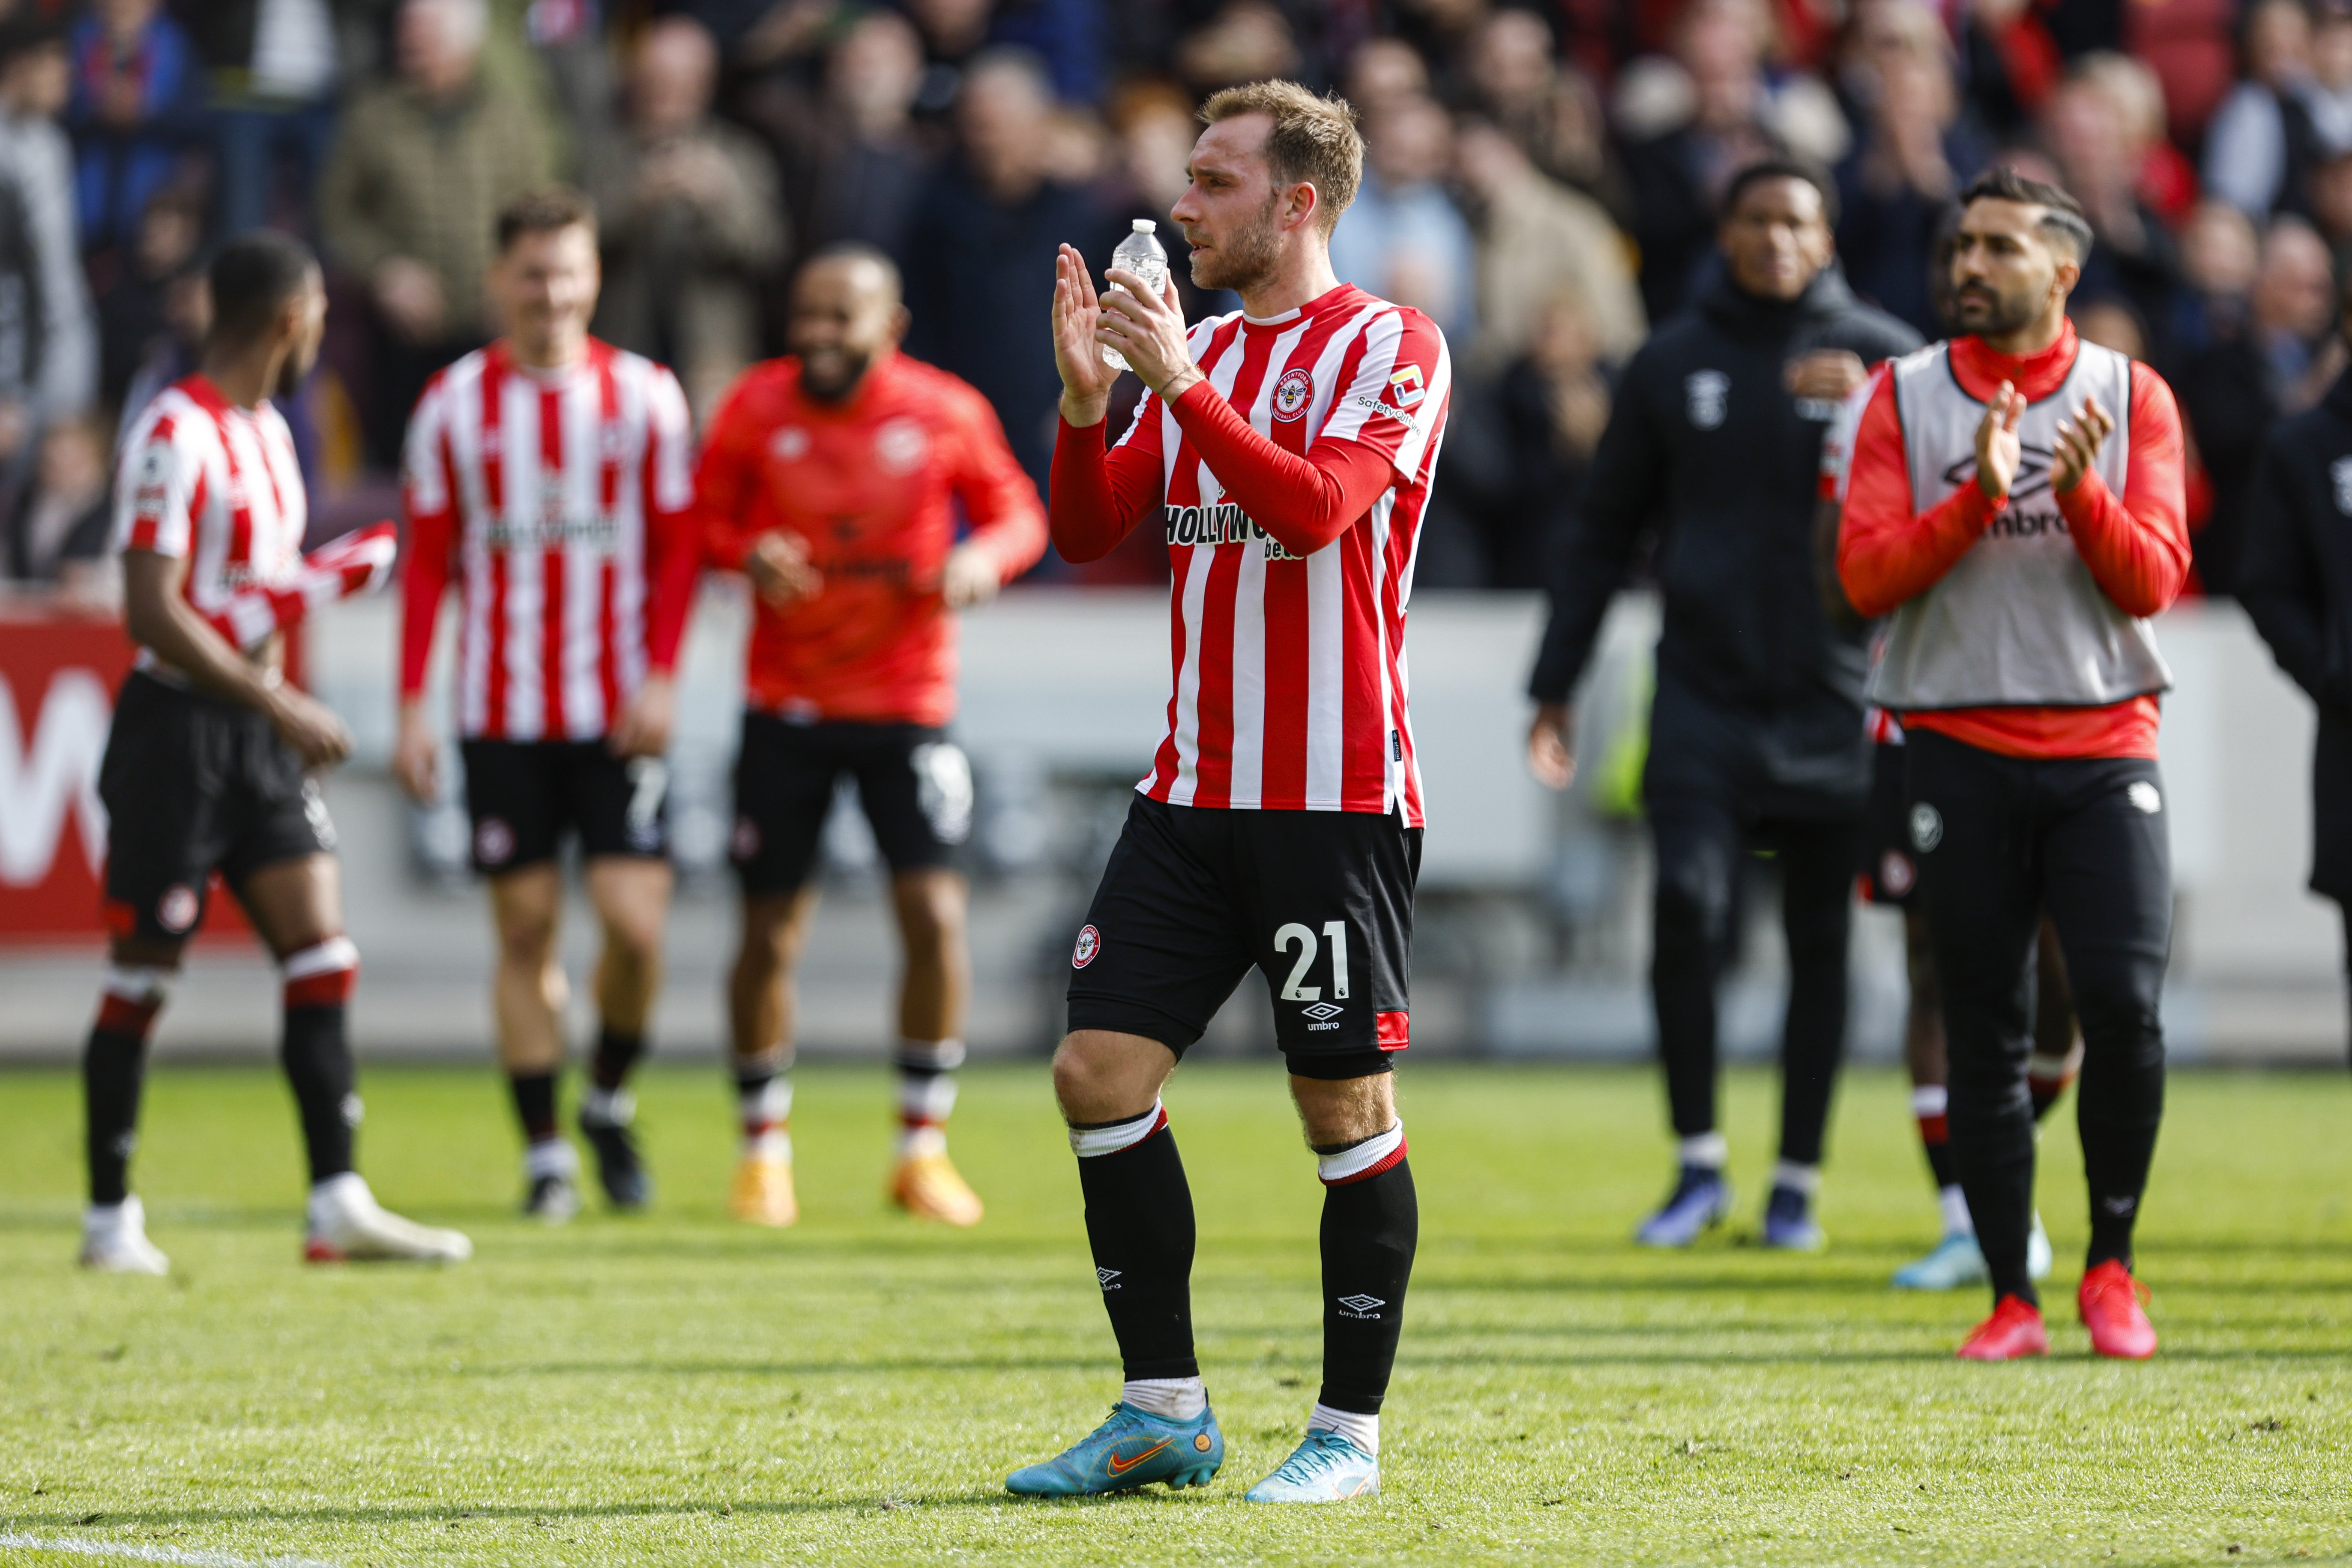 Brentford’s Christian Eriksen applauds the fans after his side took another huge step to Premier League safety after beating West Ham 2-0 (Steve Paston/PA)